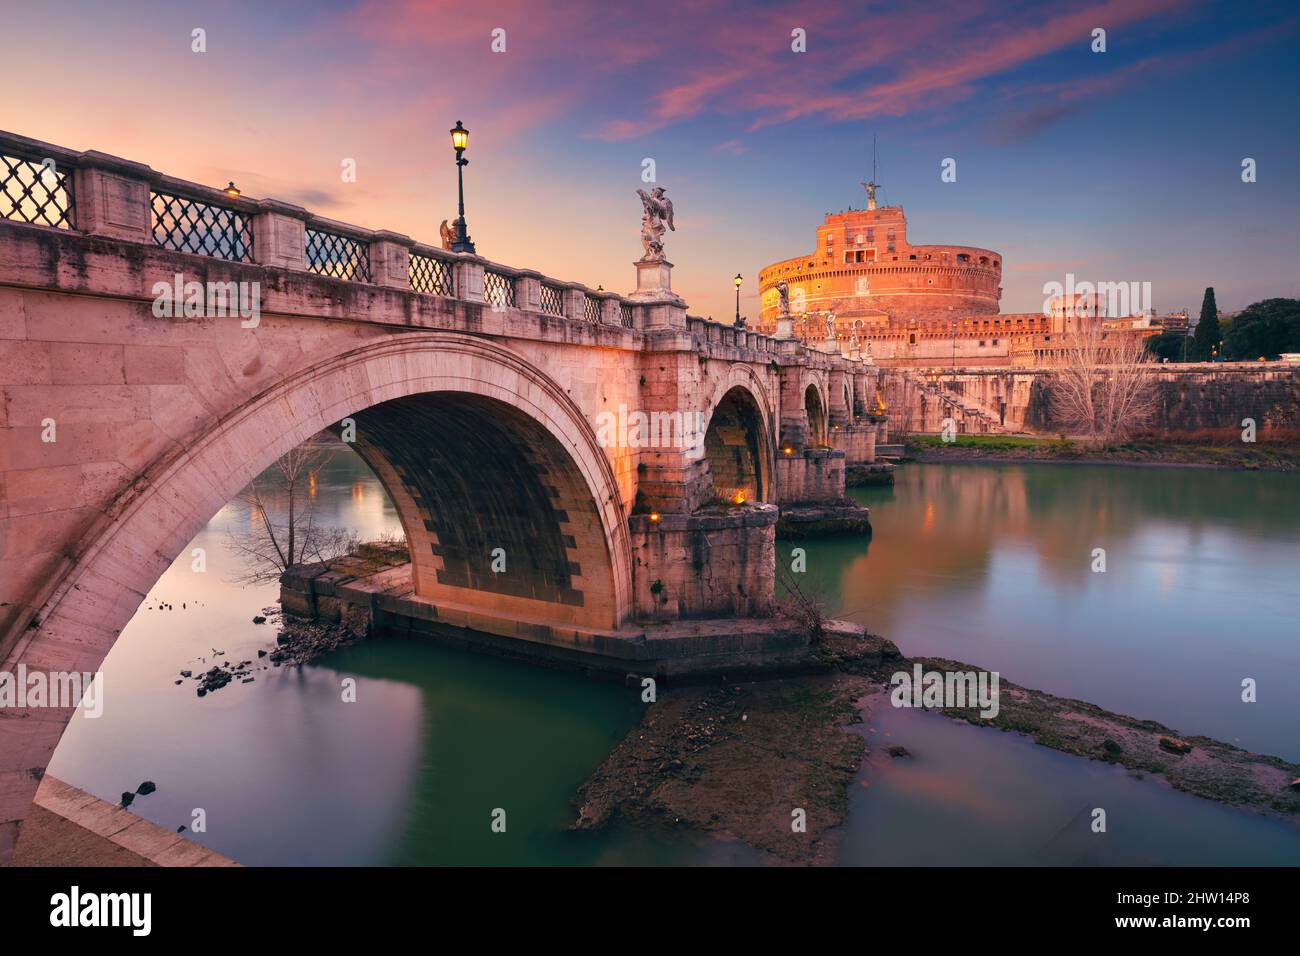 Rome, Italy. Image of the Castle of the Holy Angel and Holy Angel Bridge over the Tiber River in Rome at sunset. Stock Photo